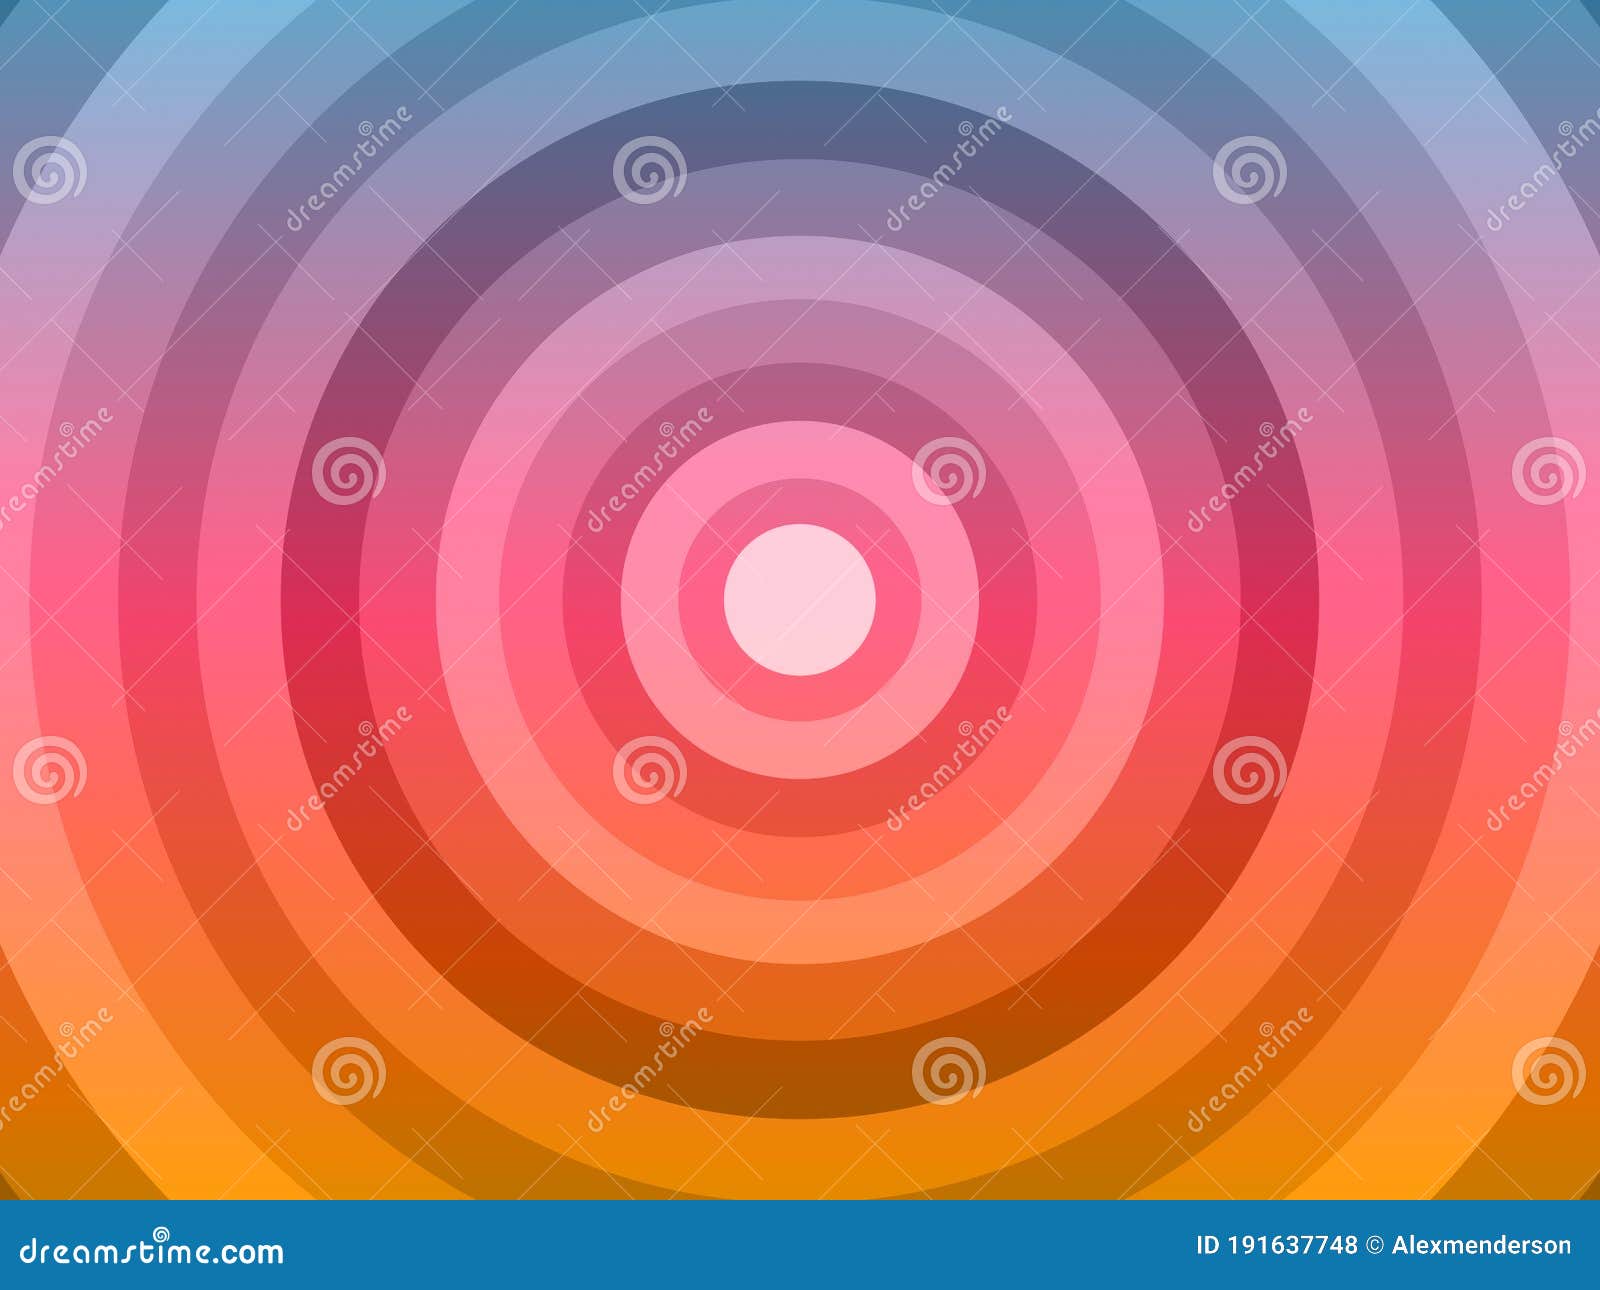 Abstract Colorful Background with Rounded Pattern Stock Photo - Image ...